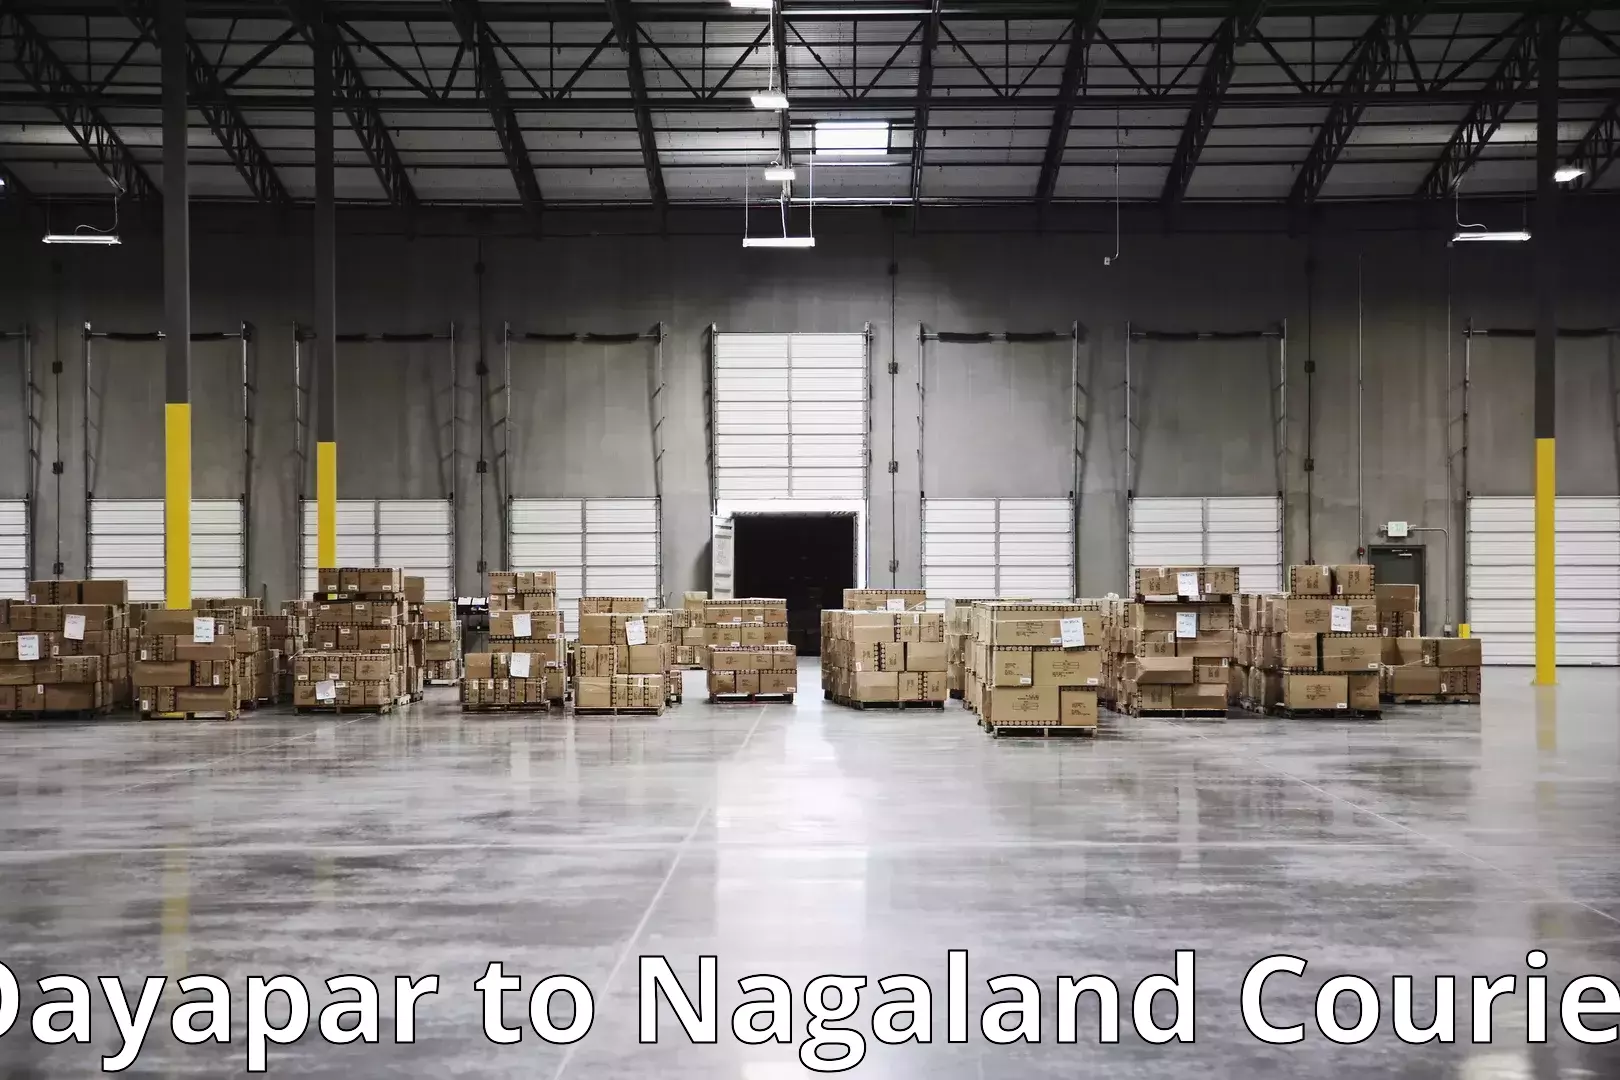 Trusted relocation experts Dayapar to Nagaland